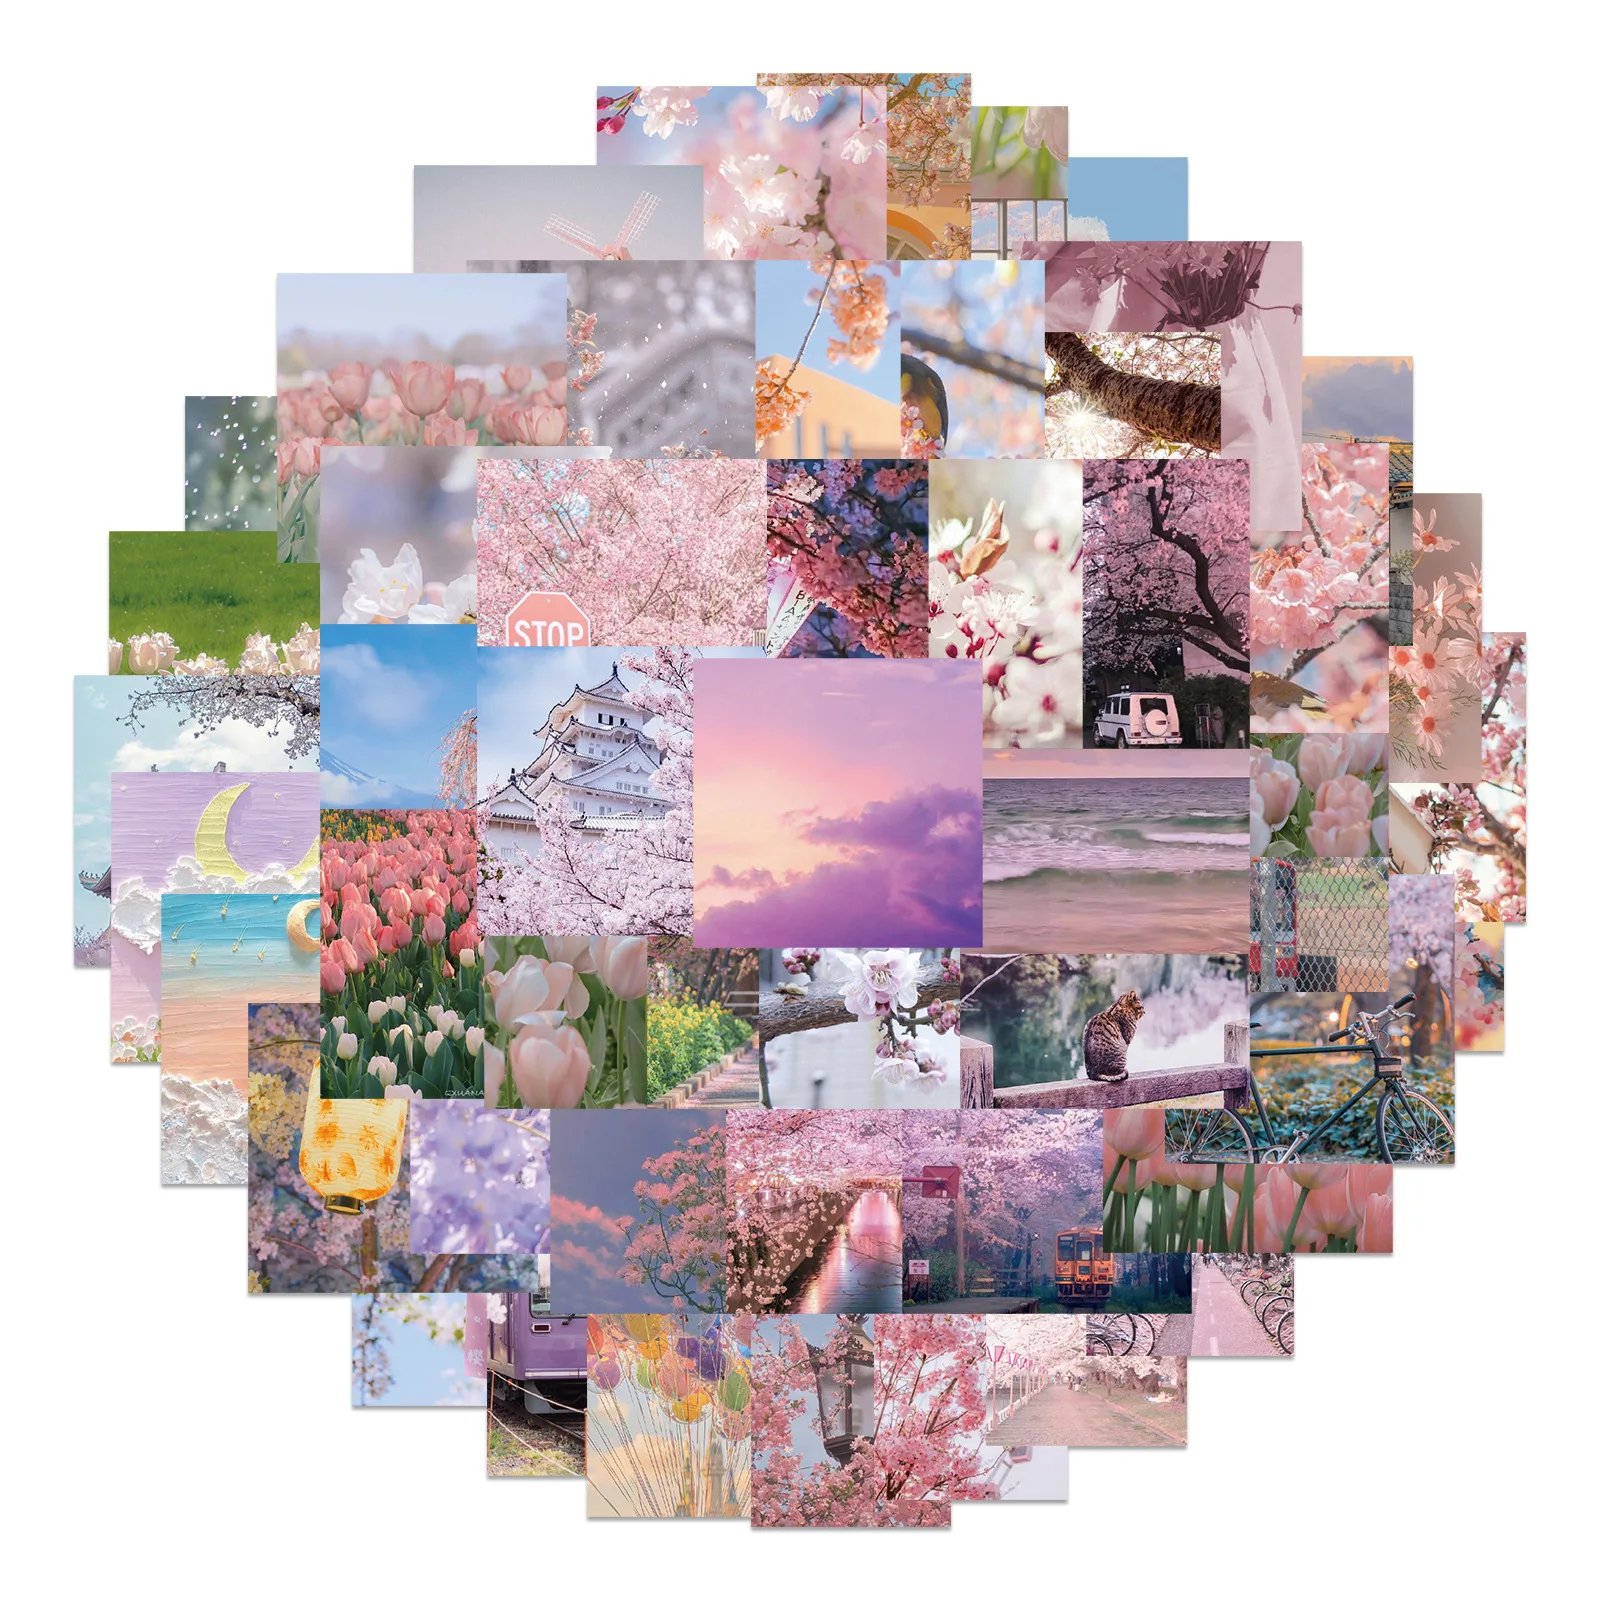 

65pcs Romantic Spring Flower Stickers Aesthetic Ins Style Cherry Blossoms Decals Luggage Laptop Phone Fridge Guitar Graffiti